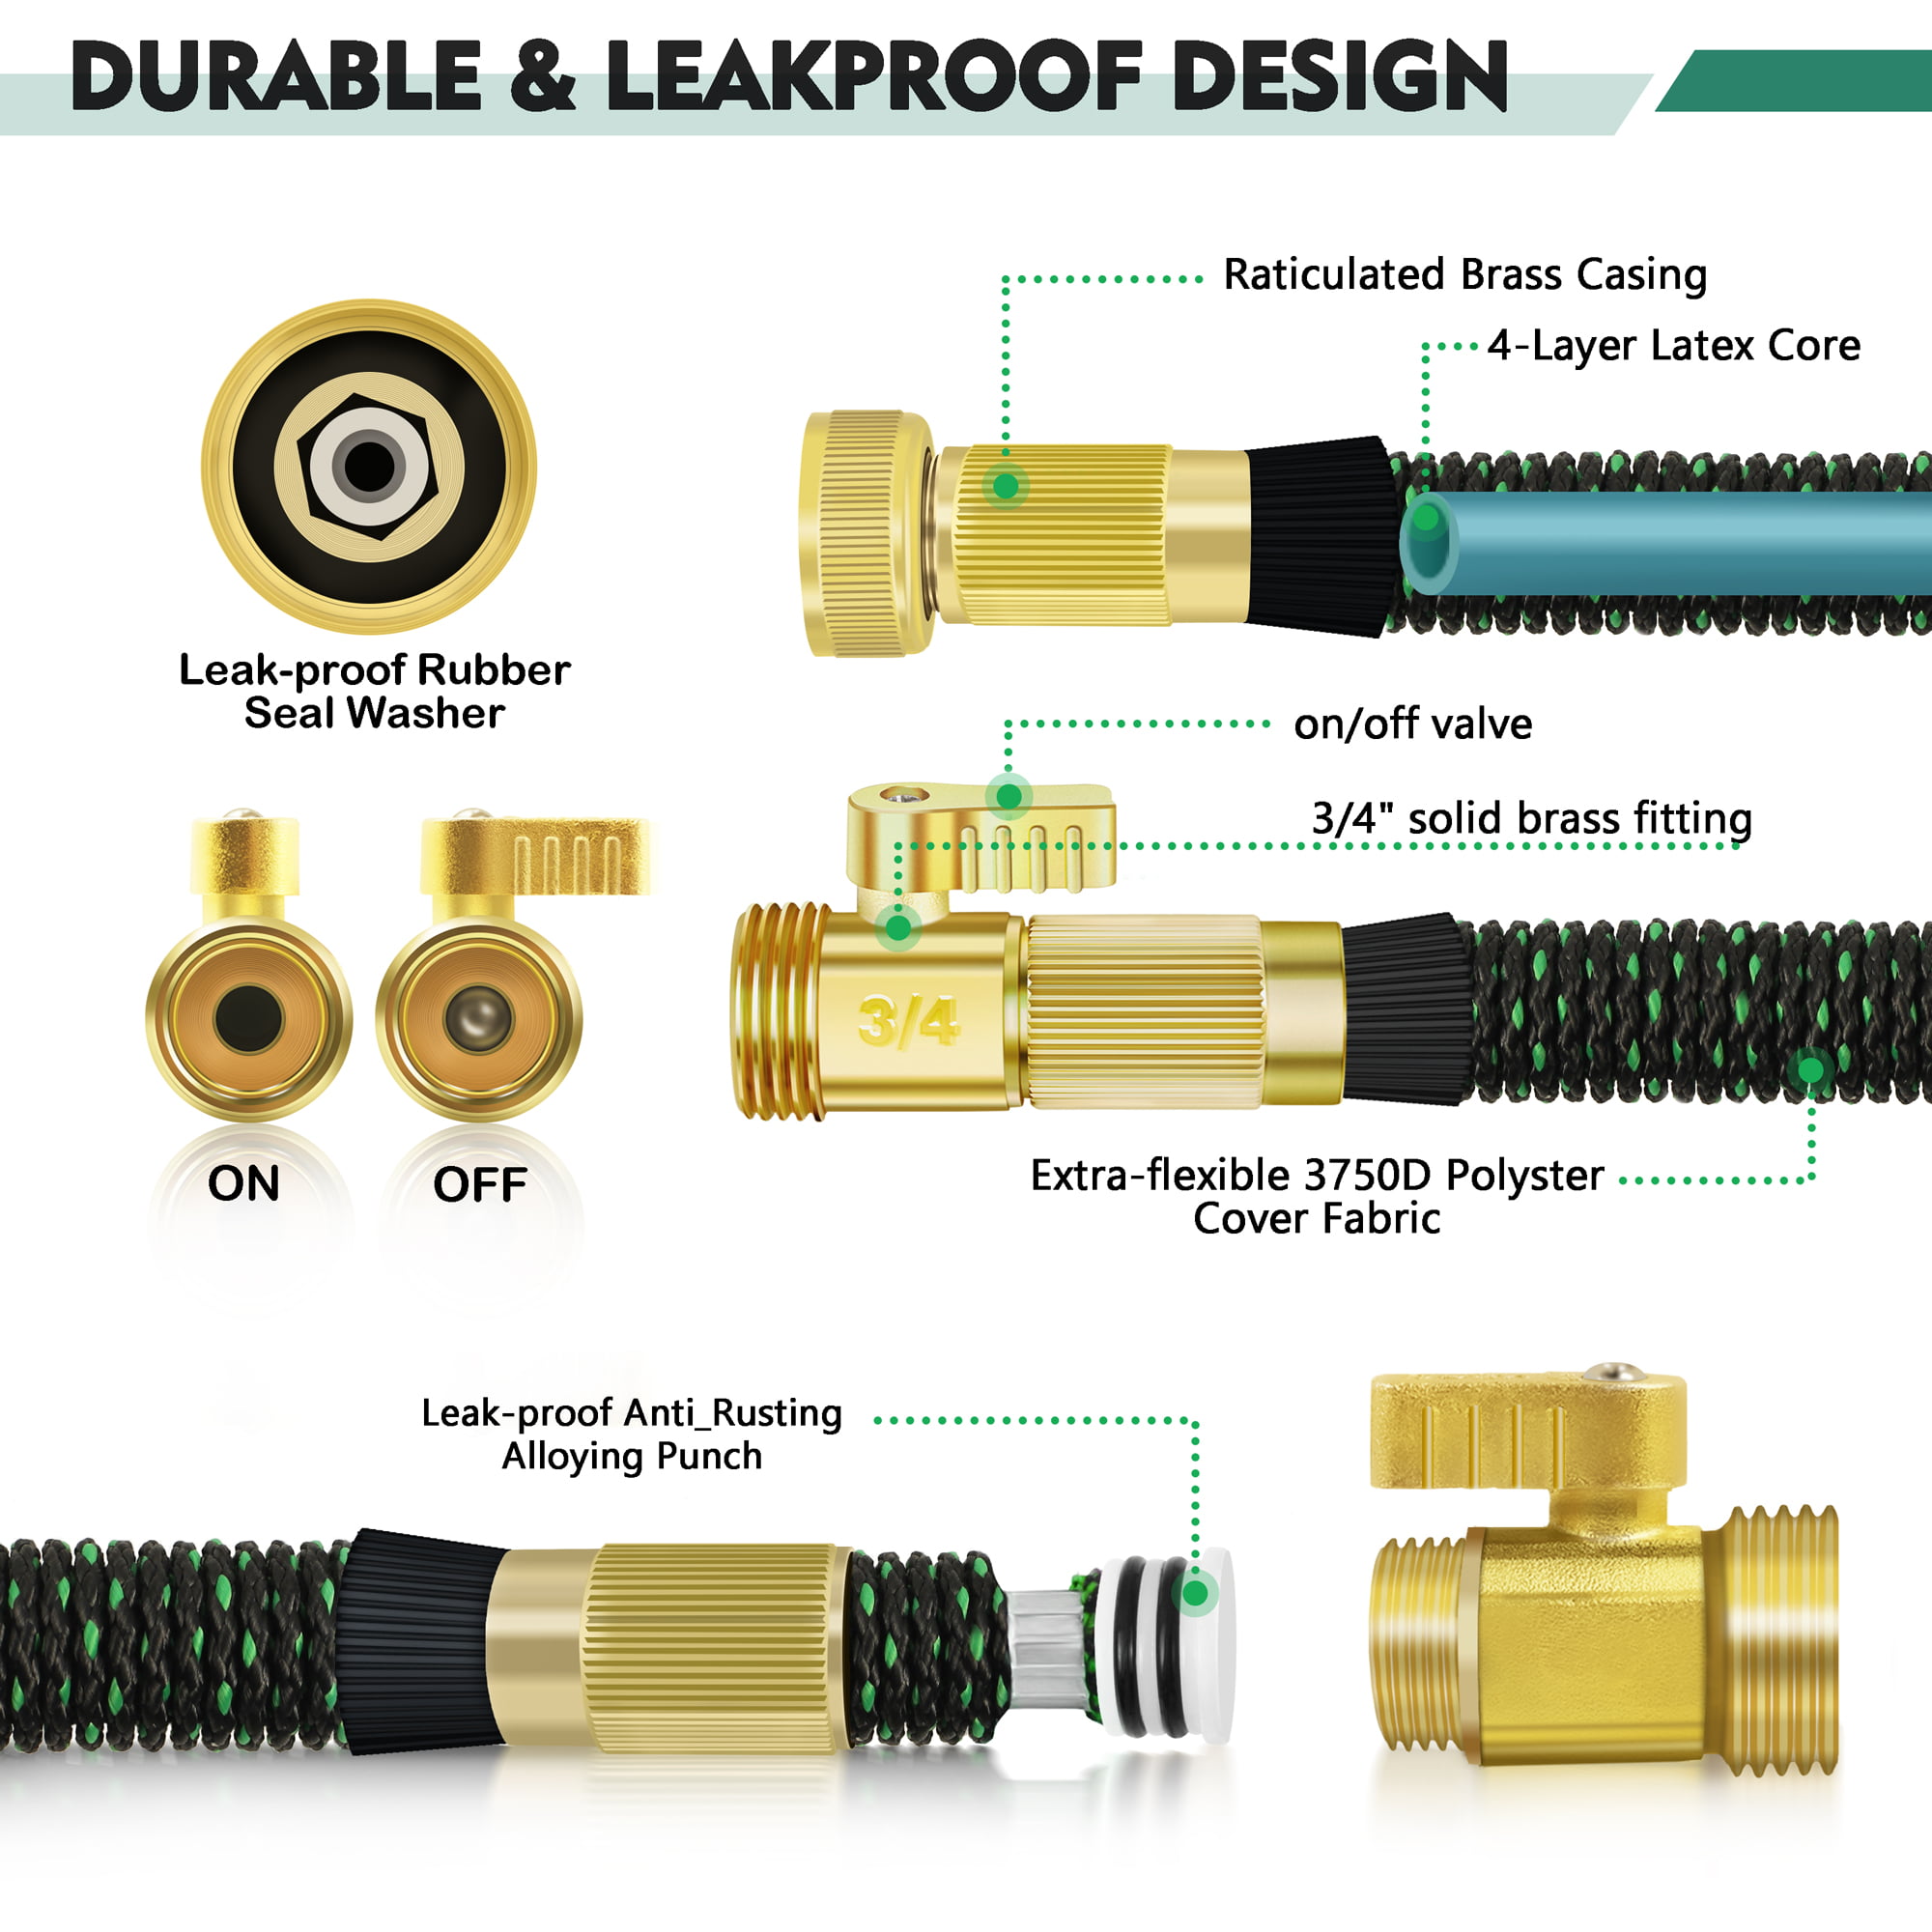 4 Layers Latex 50ft Heavy-duty 5-in-1 Water Gardening Hose with 9 Function Alloy Sprayer Nozzle No Kink Flexible Water Hose with 3/4 Solid Brass Fittings （Green） Expandable Garden Hose 